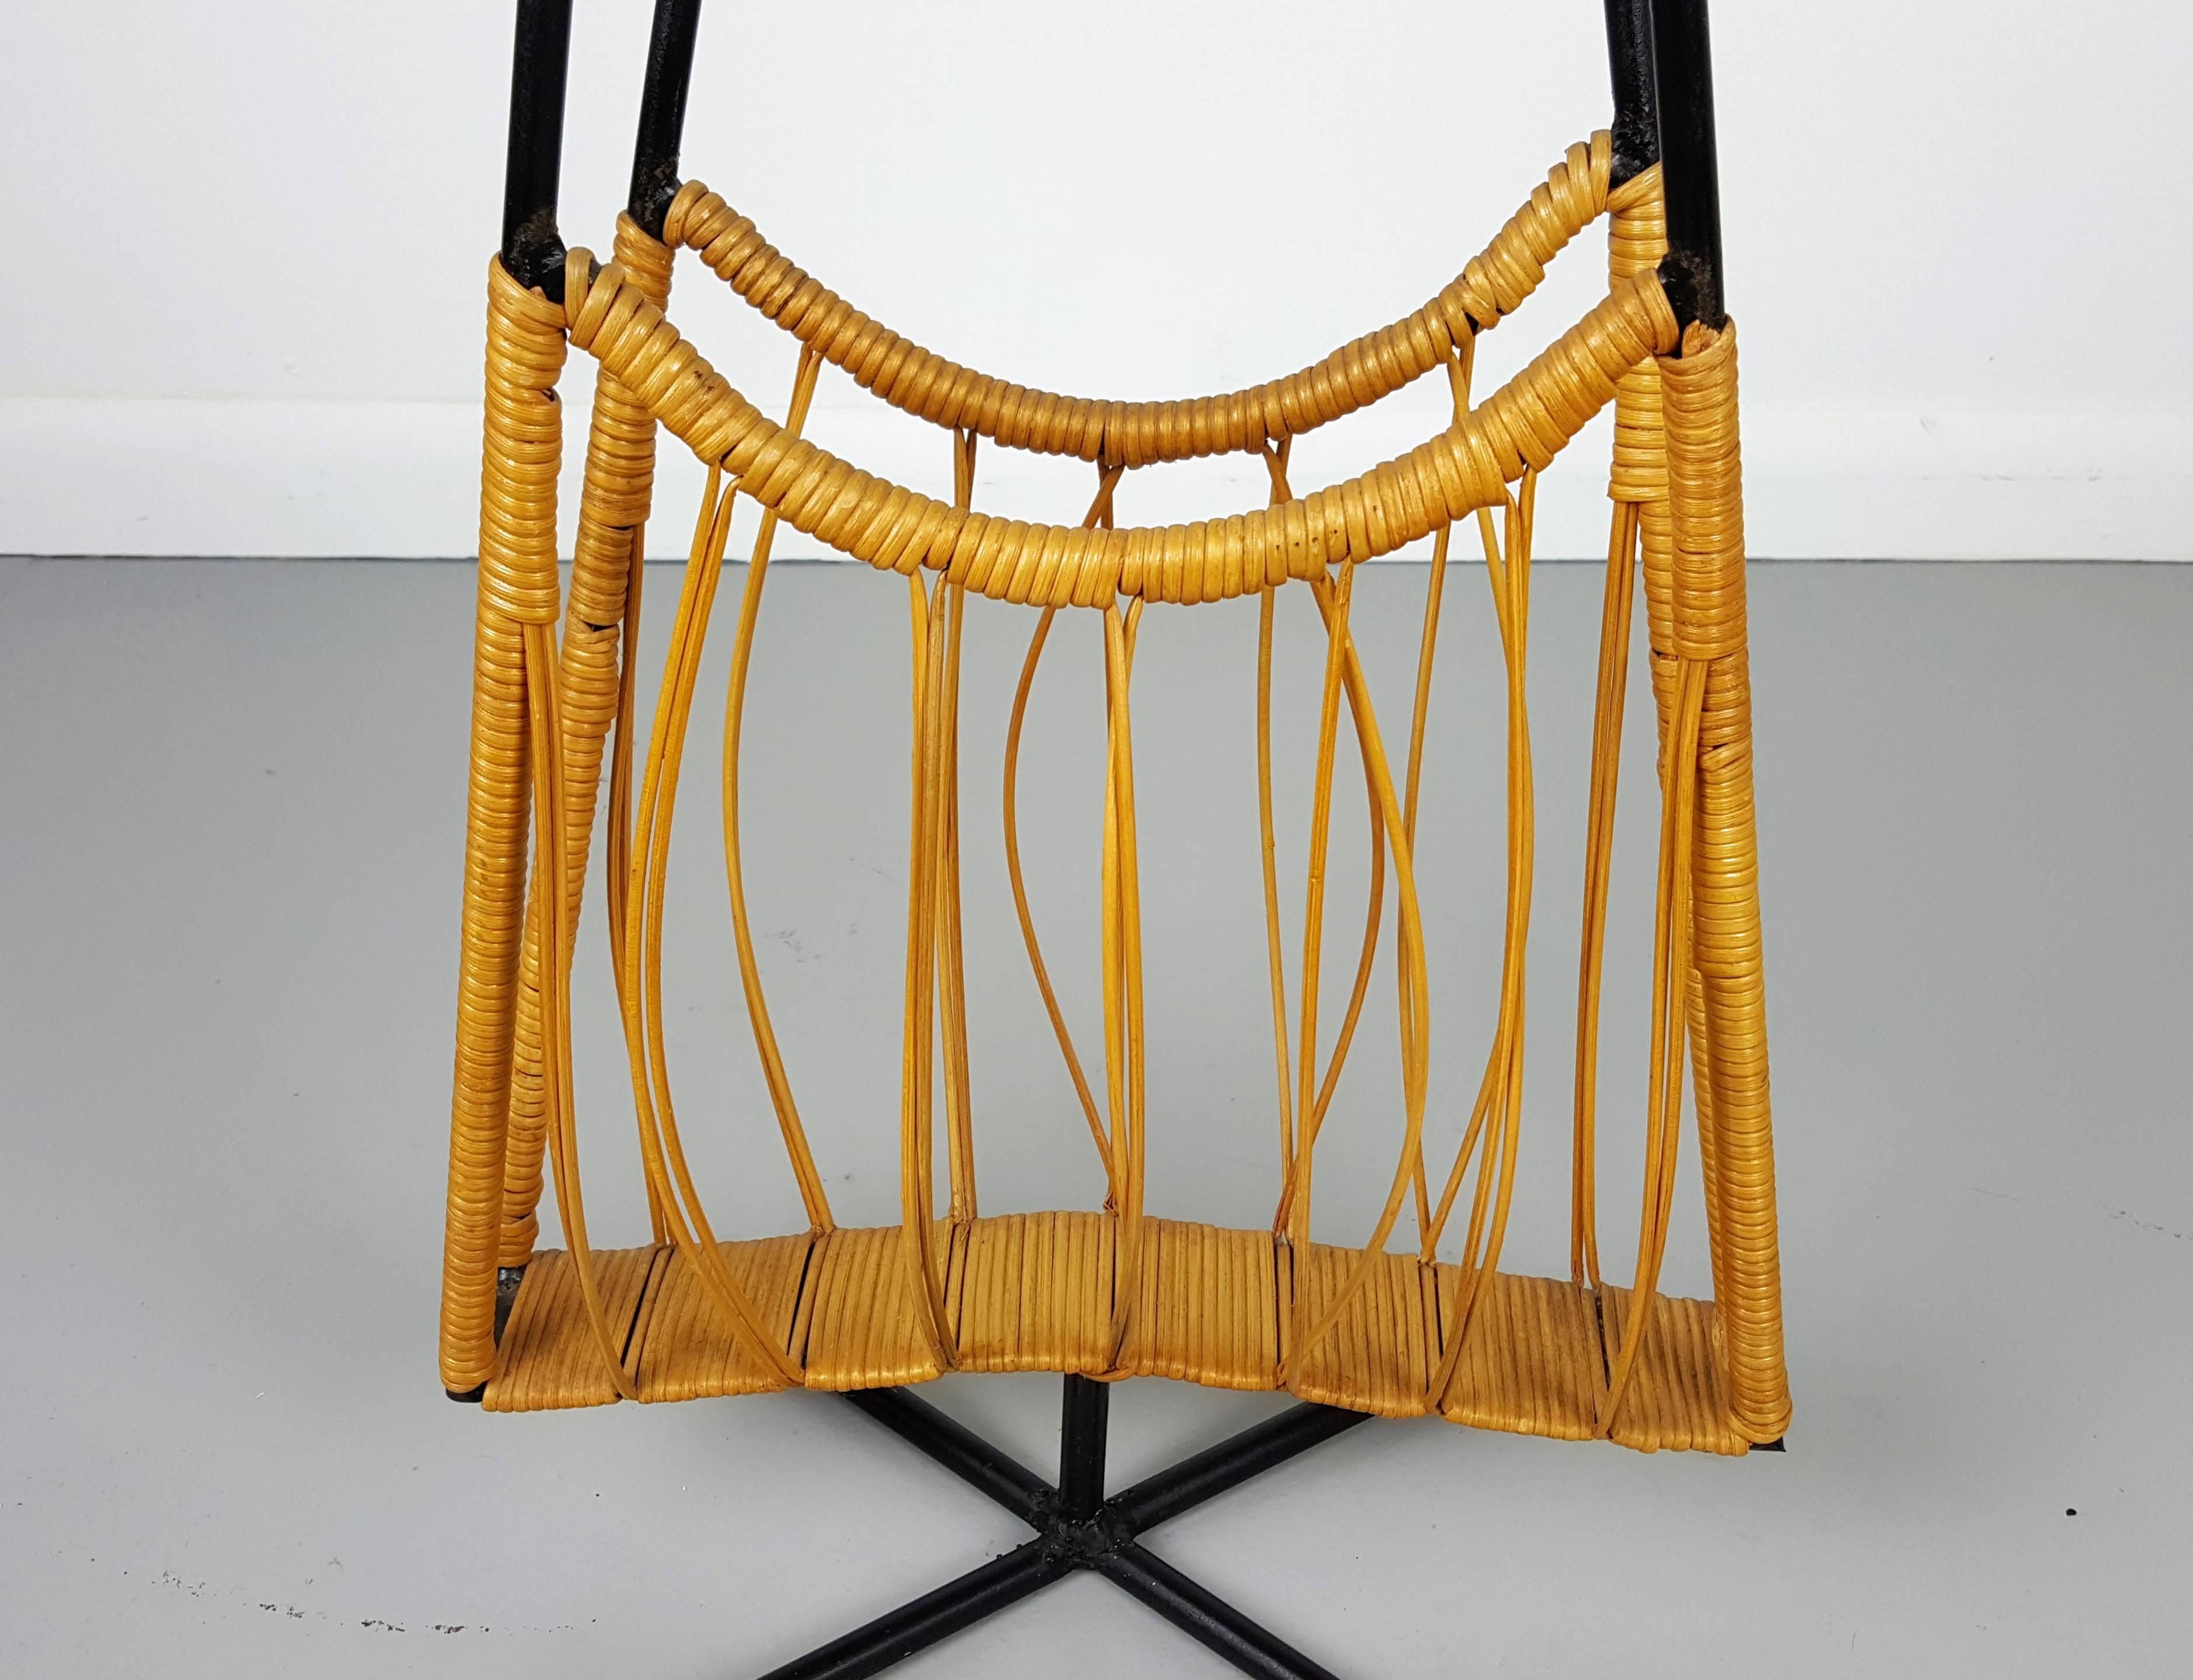 Wonderful and rare sculptural atomic age magazine rack in wicker and iron. Lovely example of California modernism. This piece has a small footprint, but the overcalled height creates big design impact.
Piece is in excellent vintage condition and